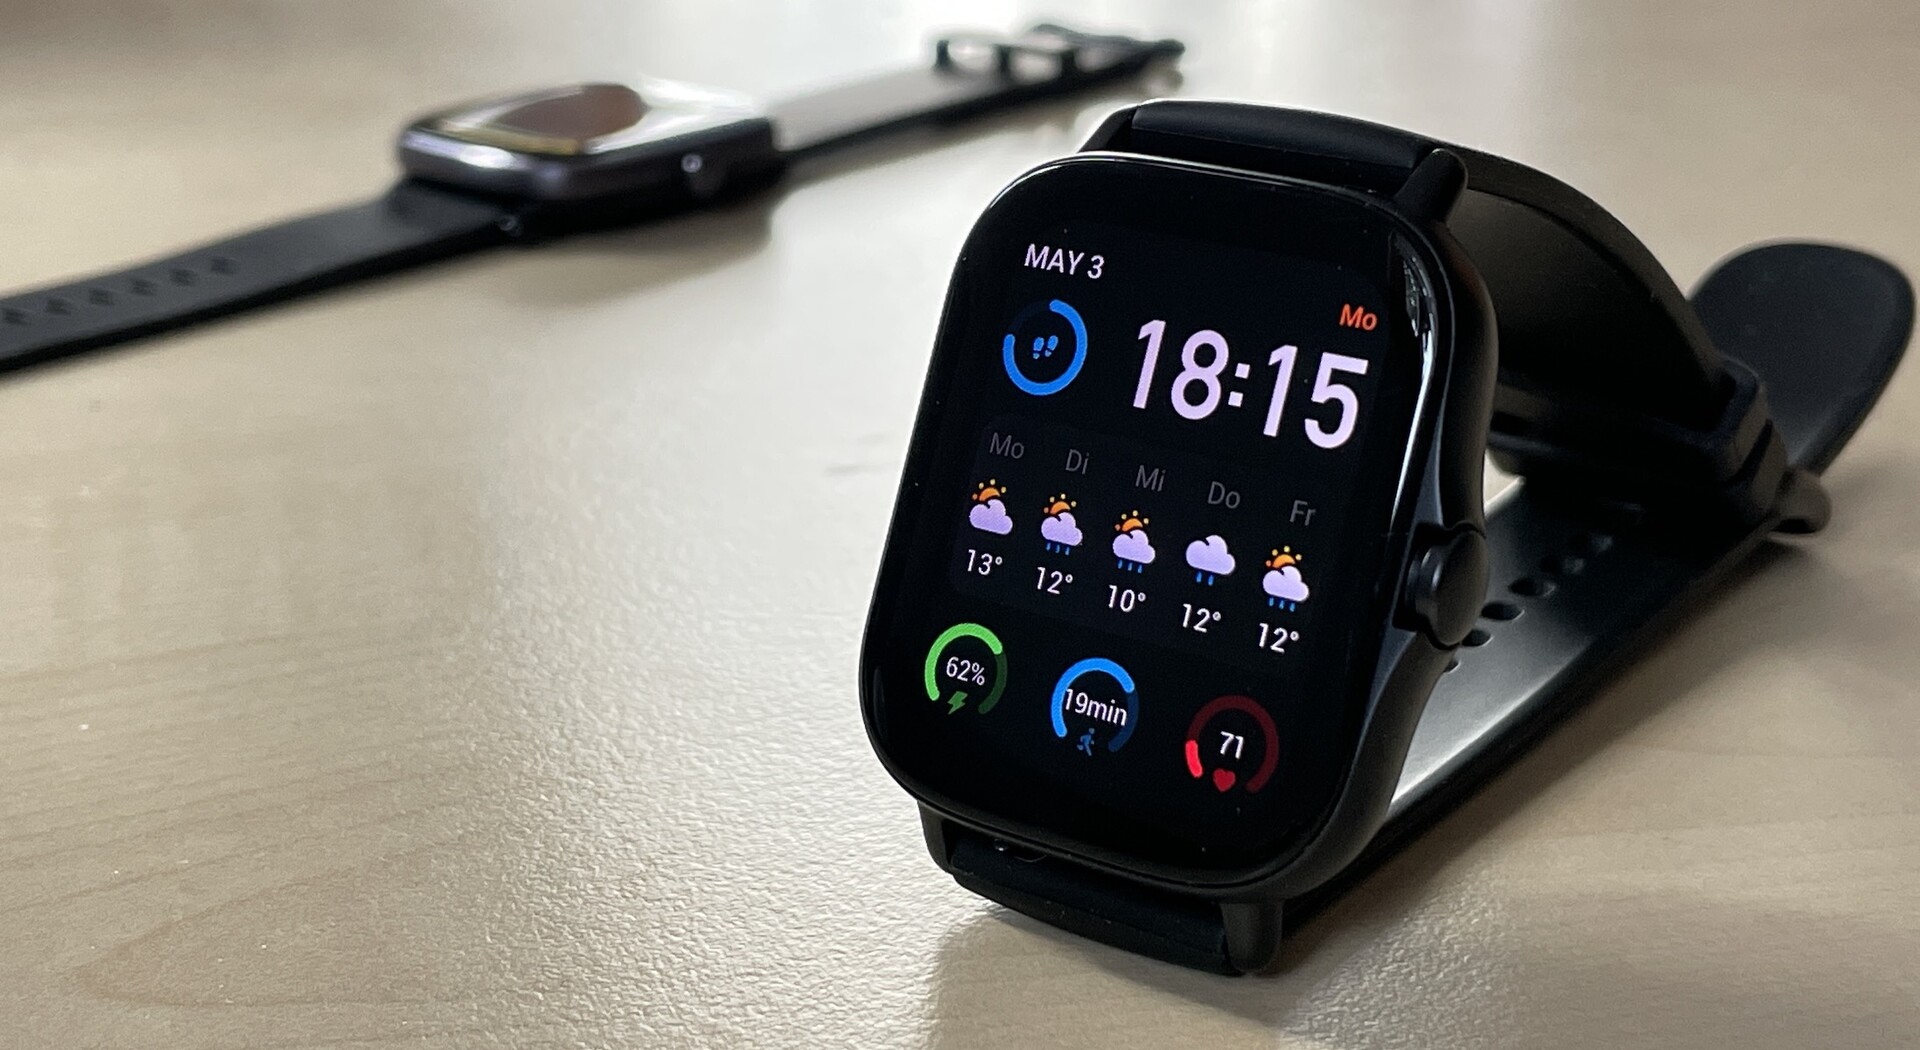 The Huami Amazfit Gts 2e Scores Points In The Smartwatch Review With Uncommon Features Notebookcheck Net Reviews